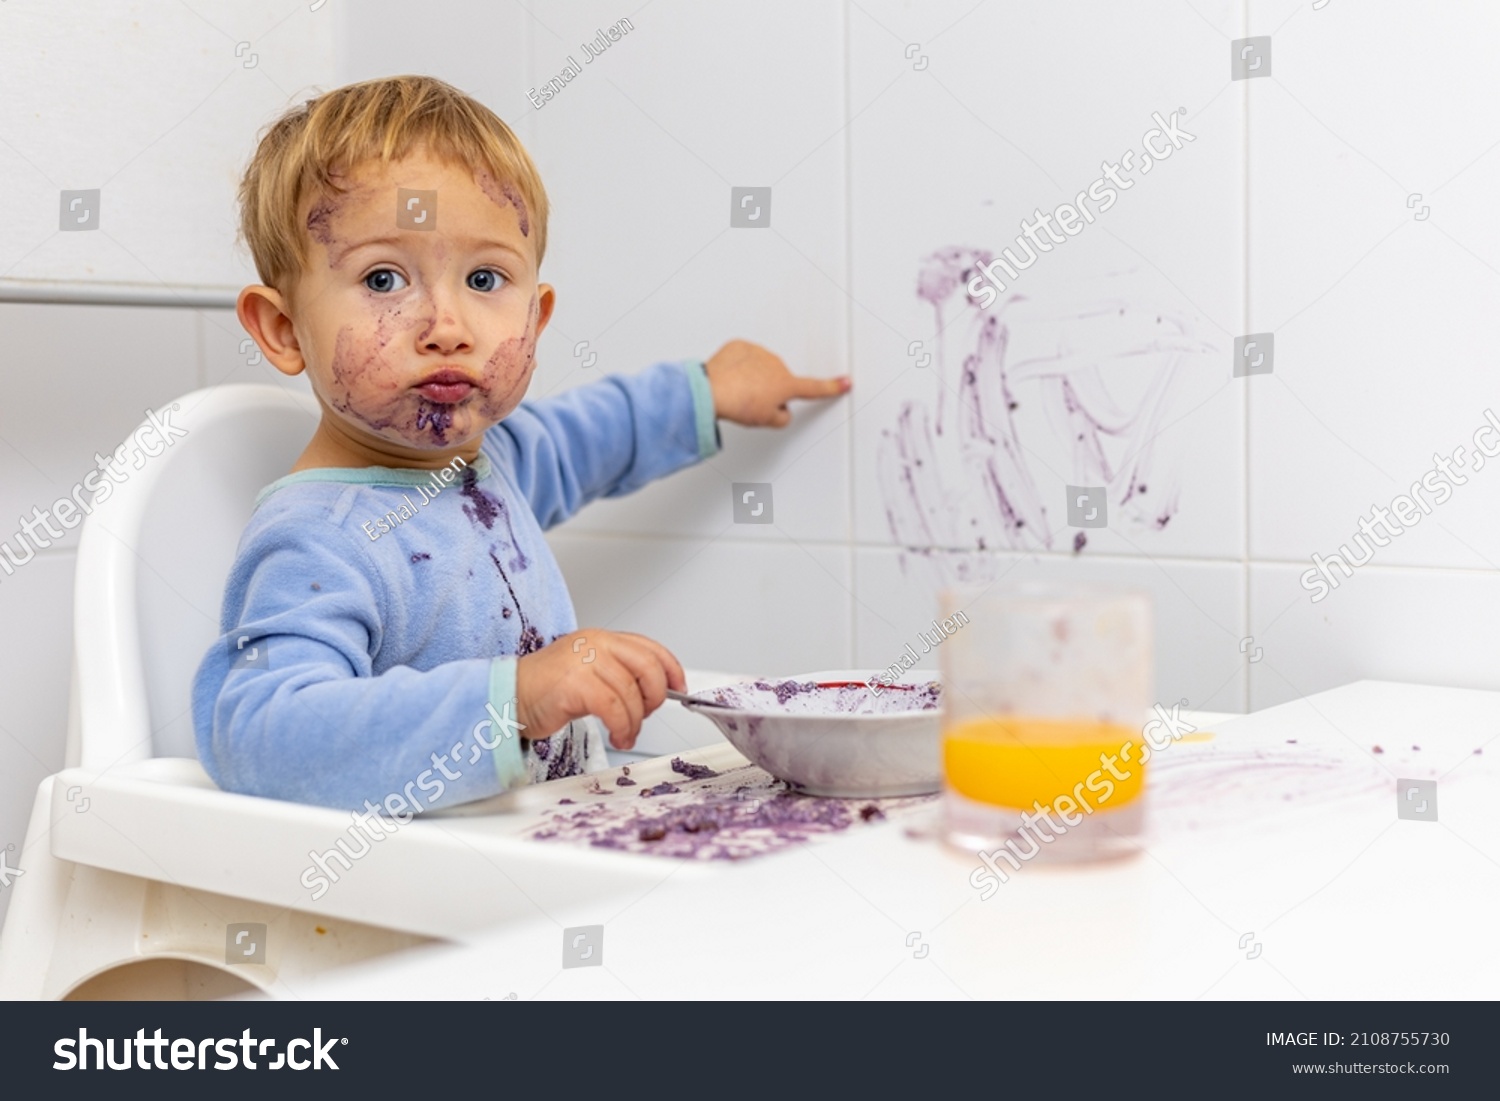 blond boy in his high chair shows the wall that he has stained with his breakfast #2108755730